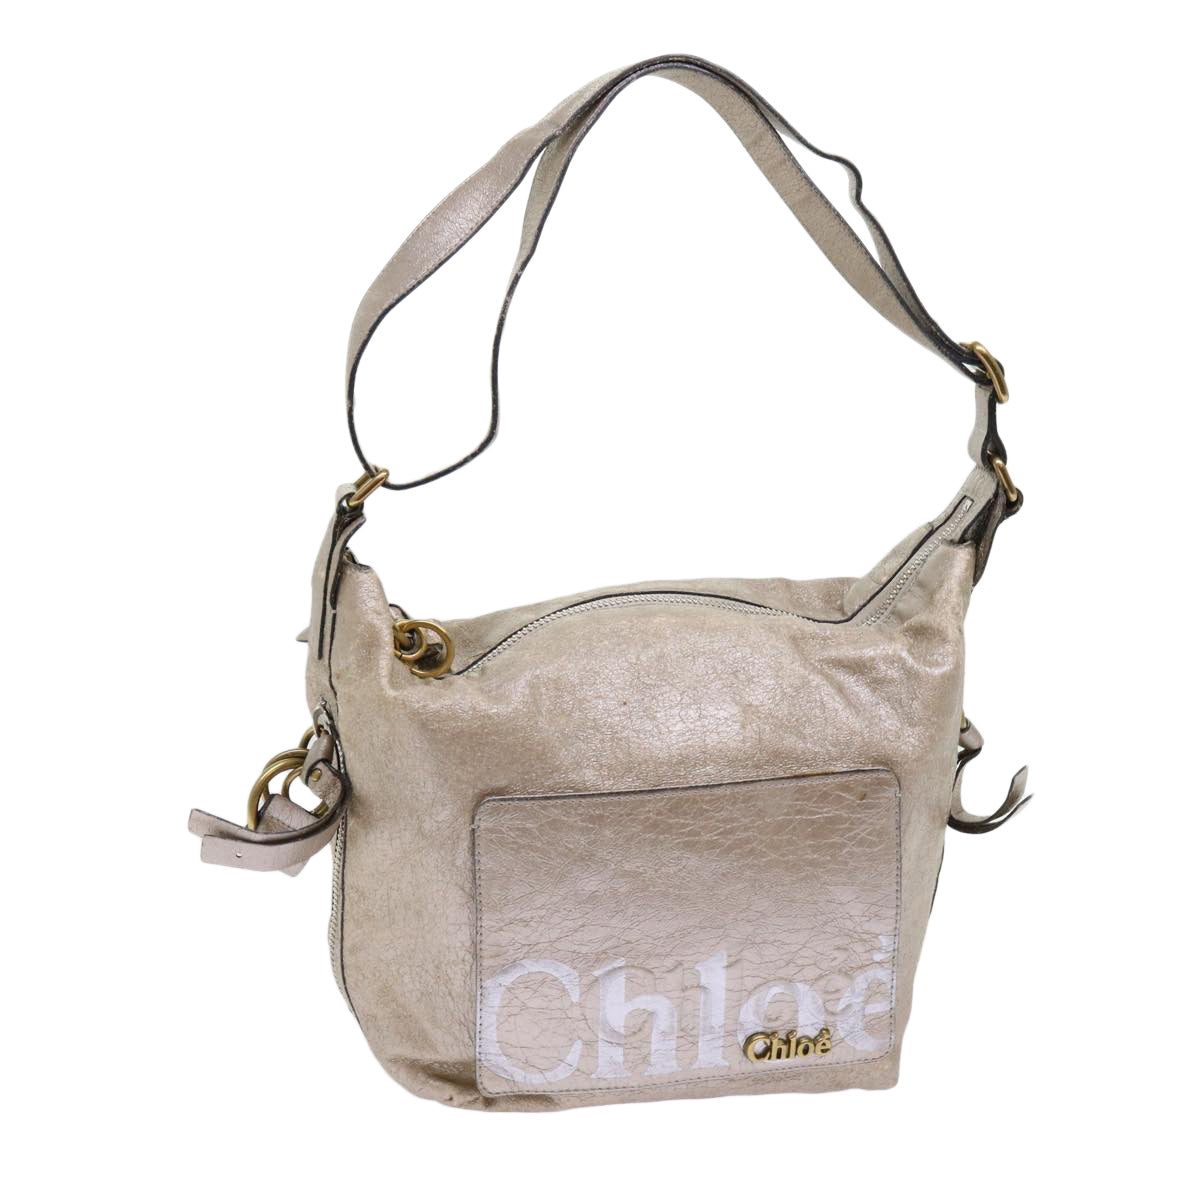 Chloe Shoulder Bag Leather Silver 02-09-51-5859 Auth bs10804